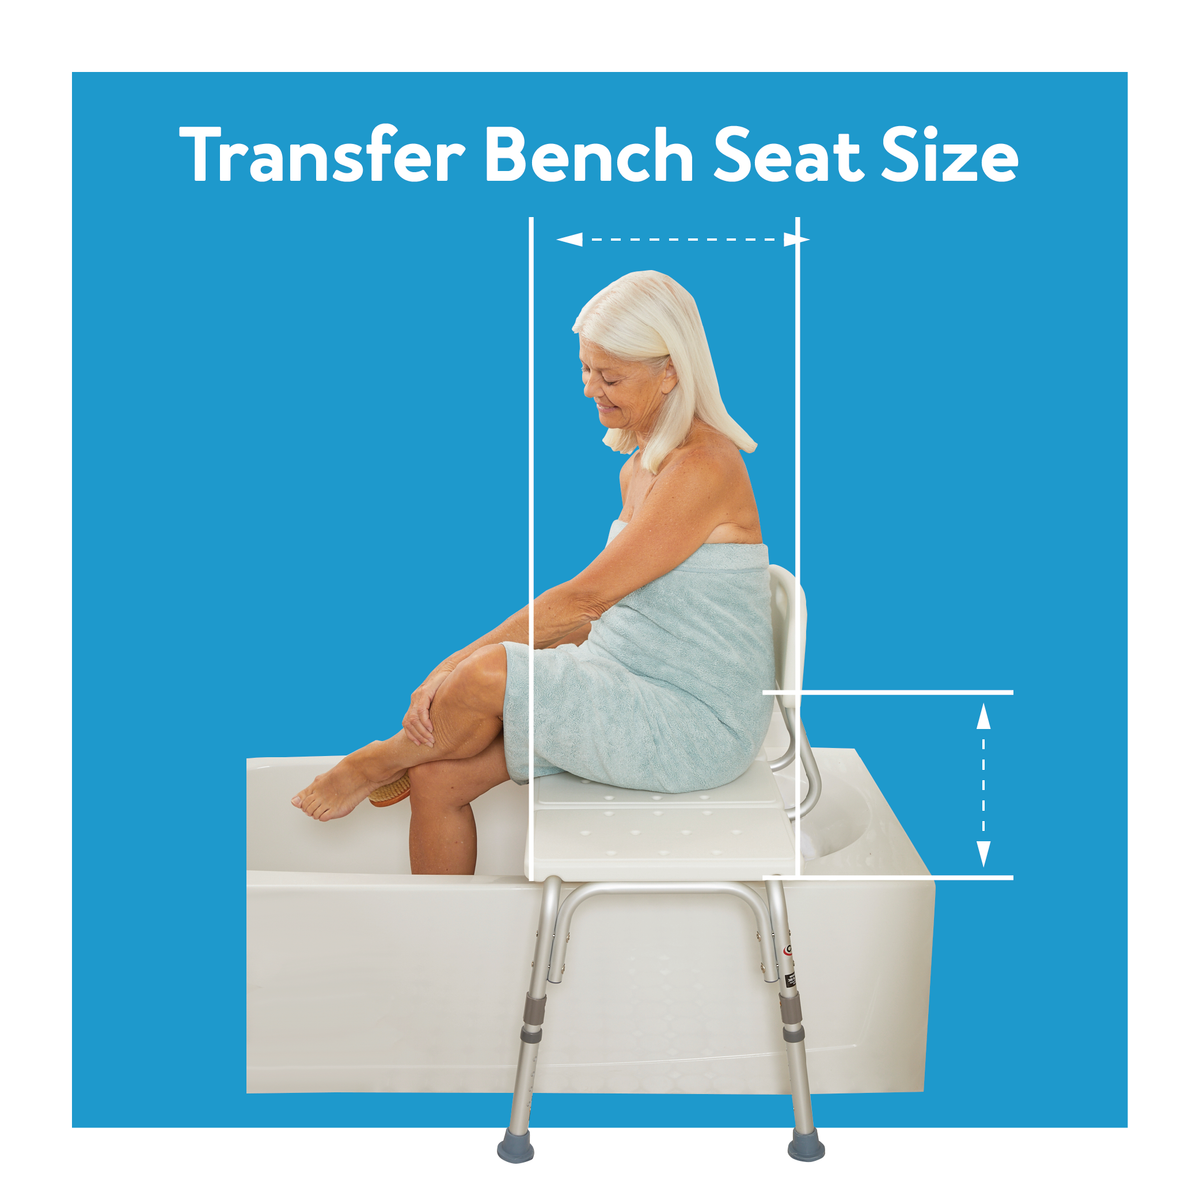 A woman sitting on a transfer bench with lines showing its seat size. Text, “transfer bench seat size